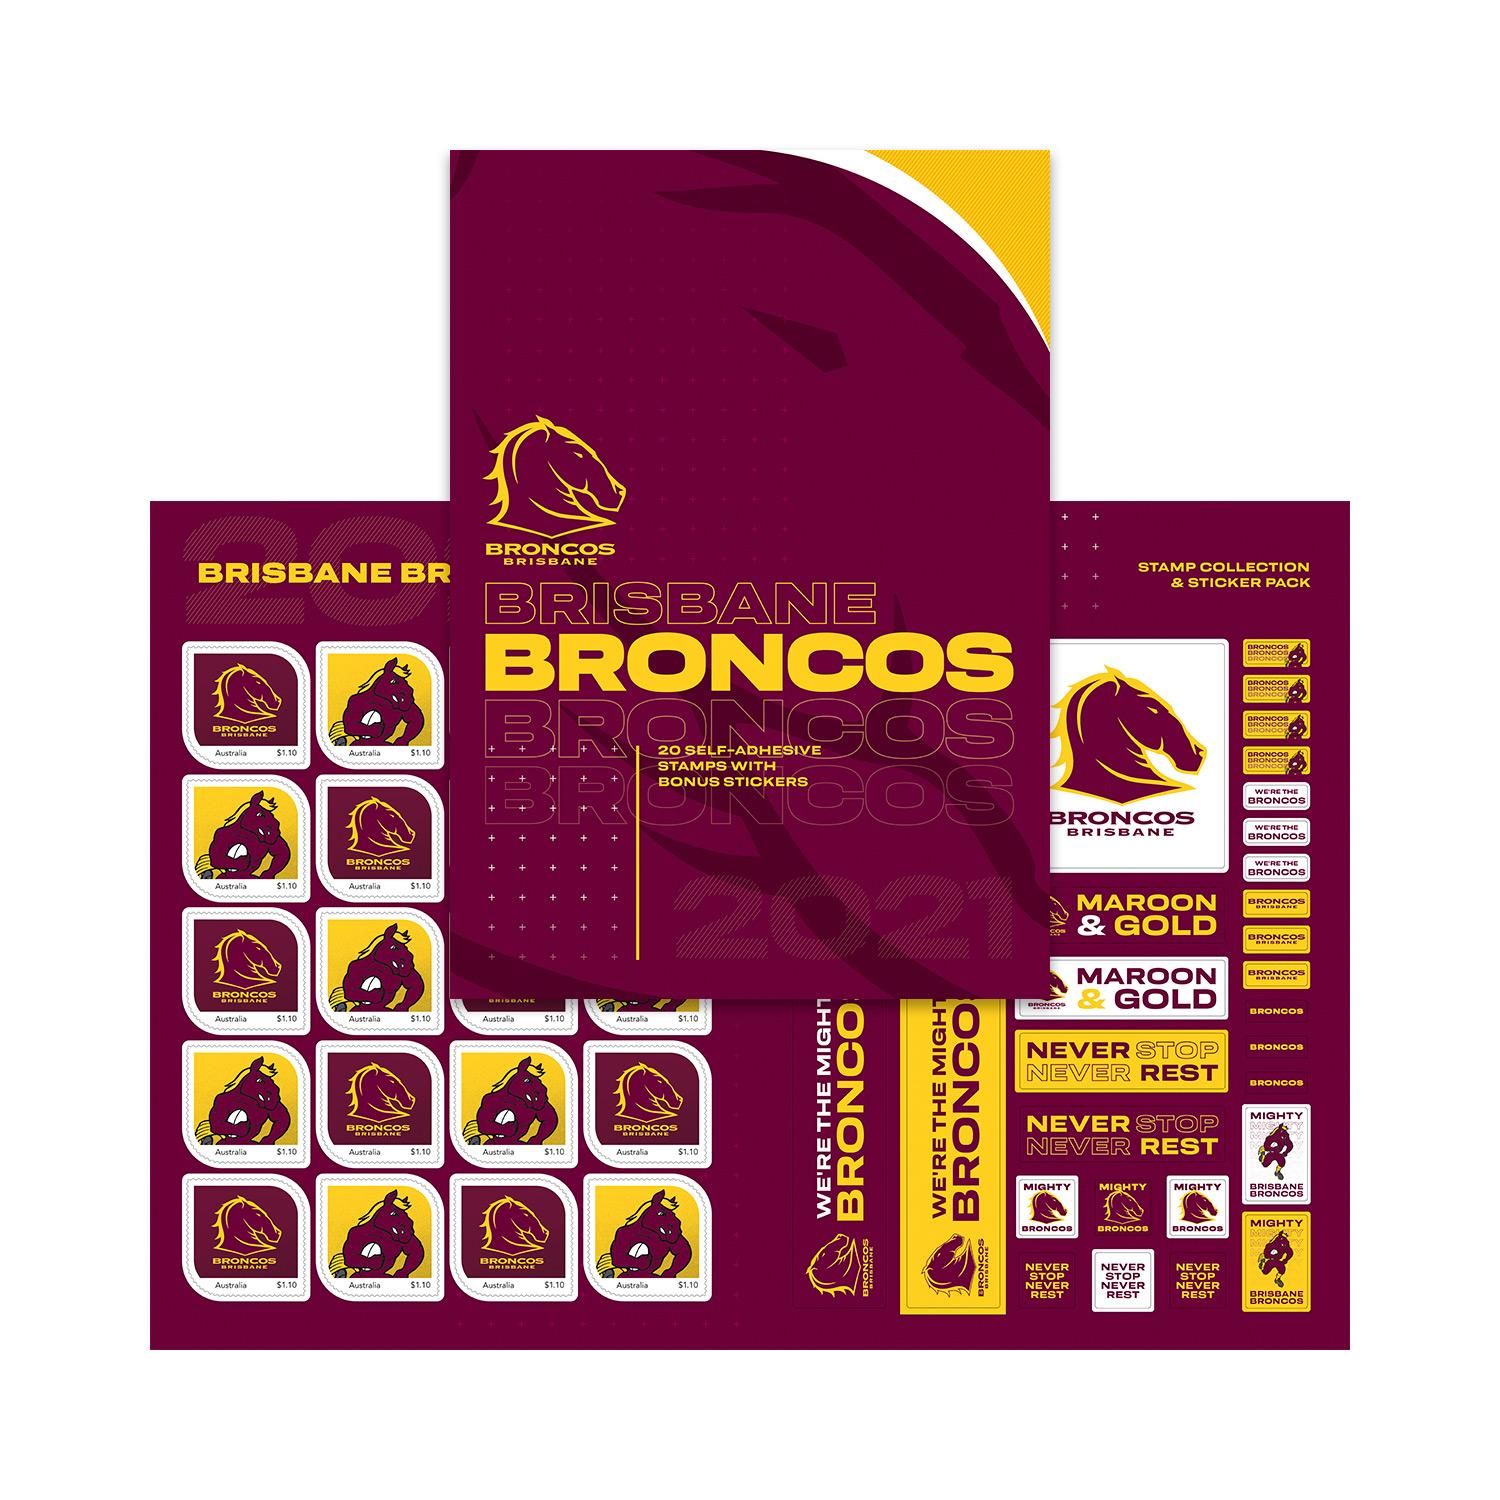 Brisbane Broncos - Lfnqeixderqjjm - The brisbane broncos rugby league football club ltd., commonly referred to as the broncos, are an australian professional rugby league football club based in the city of brisbane.